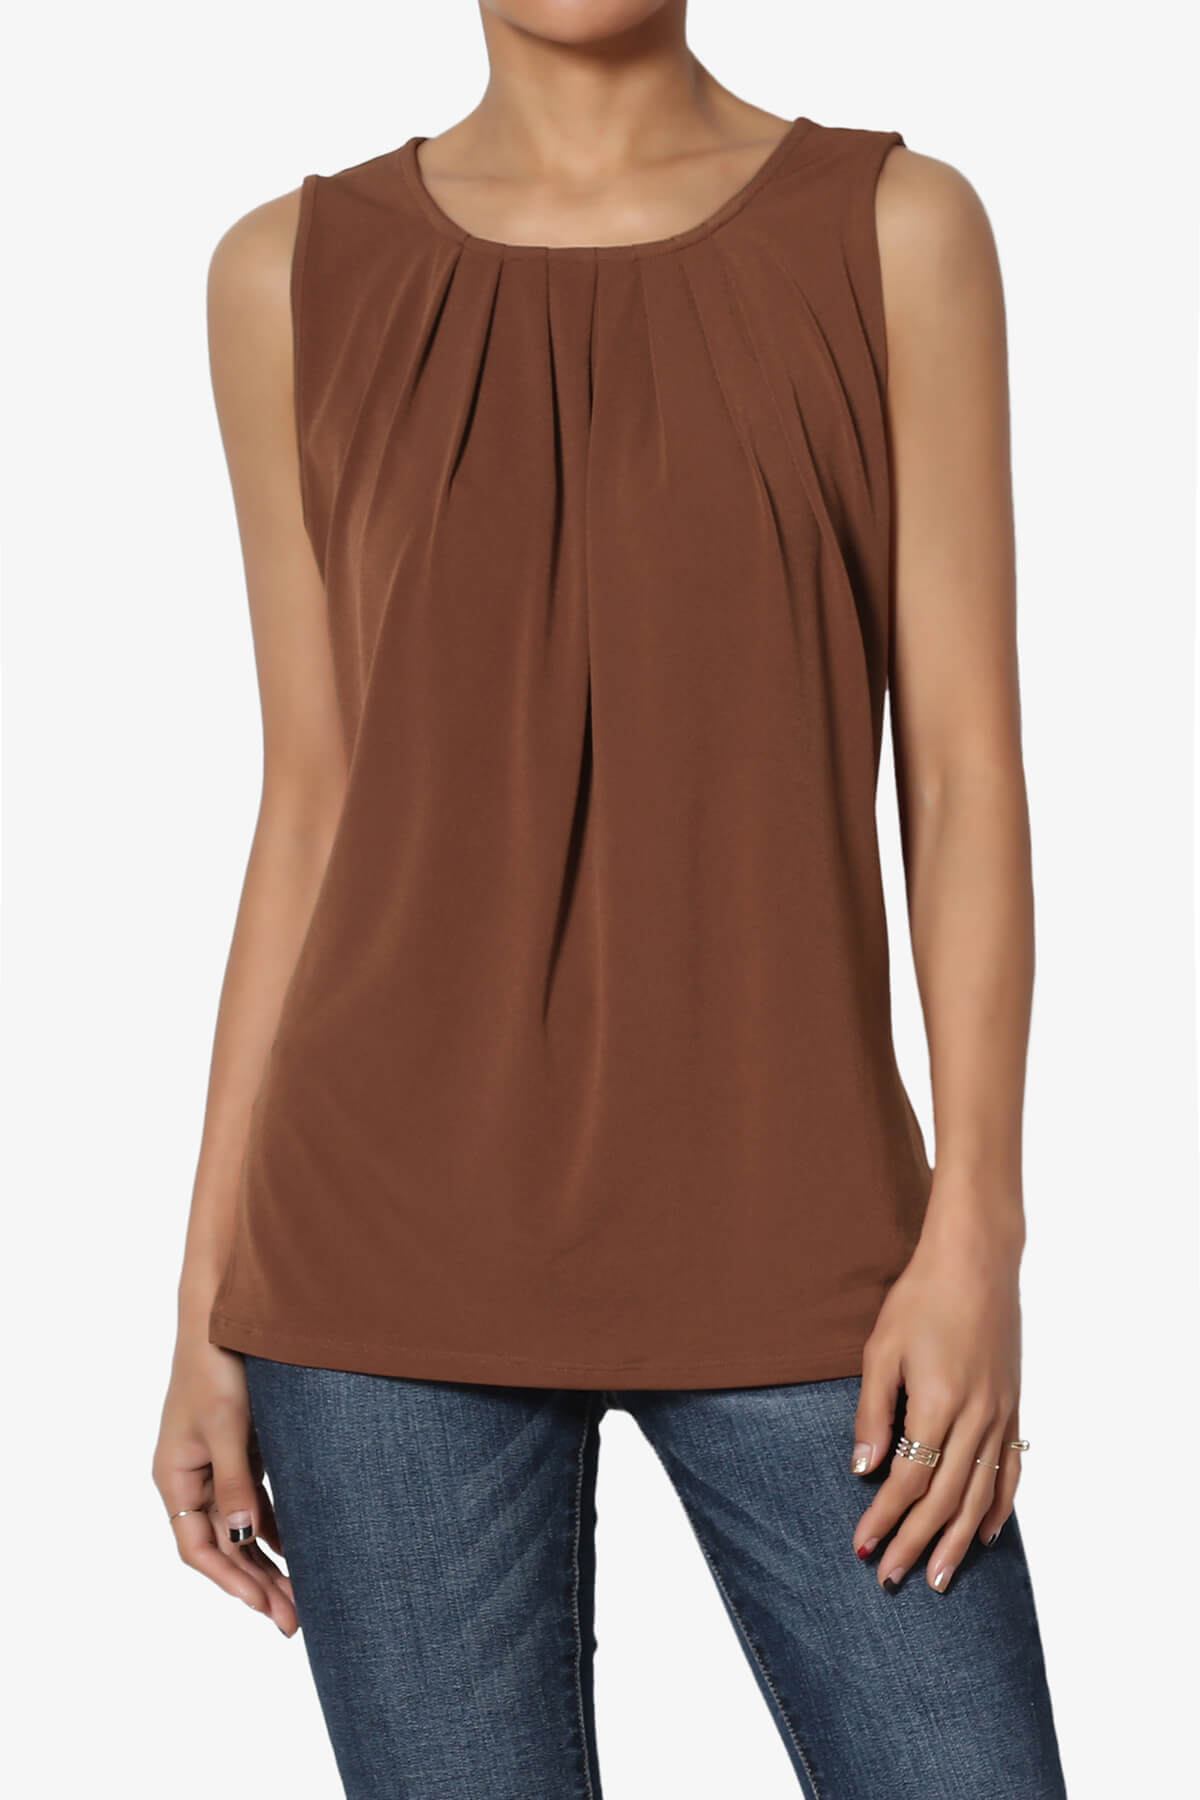 Load image into Gallery viewer, Chaffee Pleat Neck Tank Top LIGHT BROWN_1
